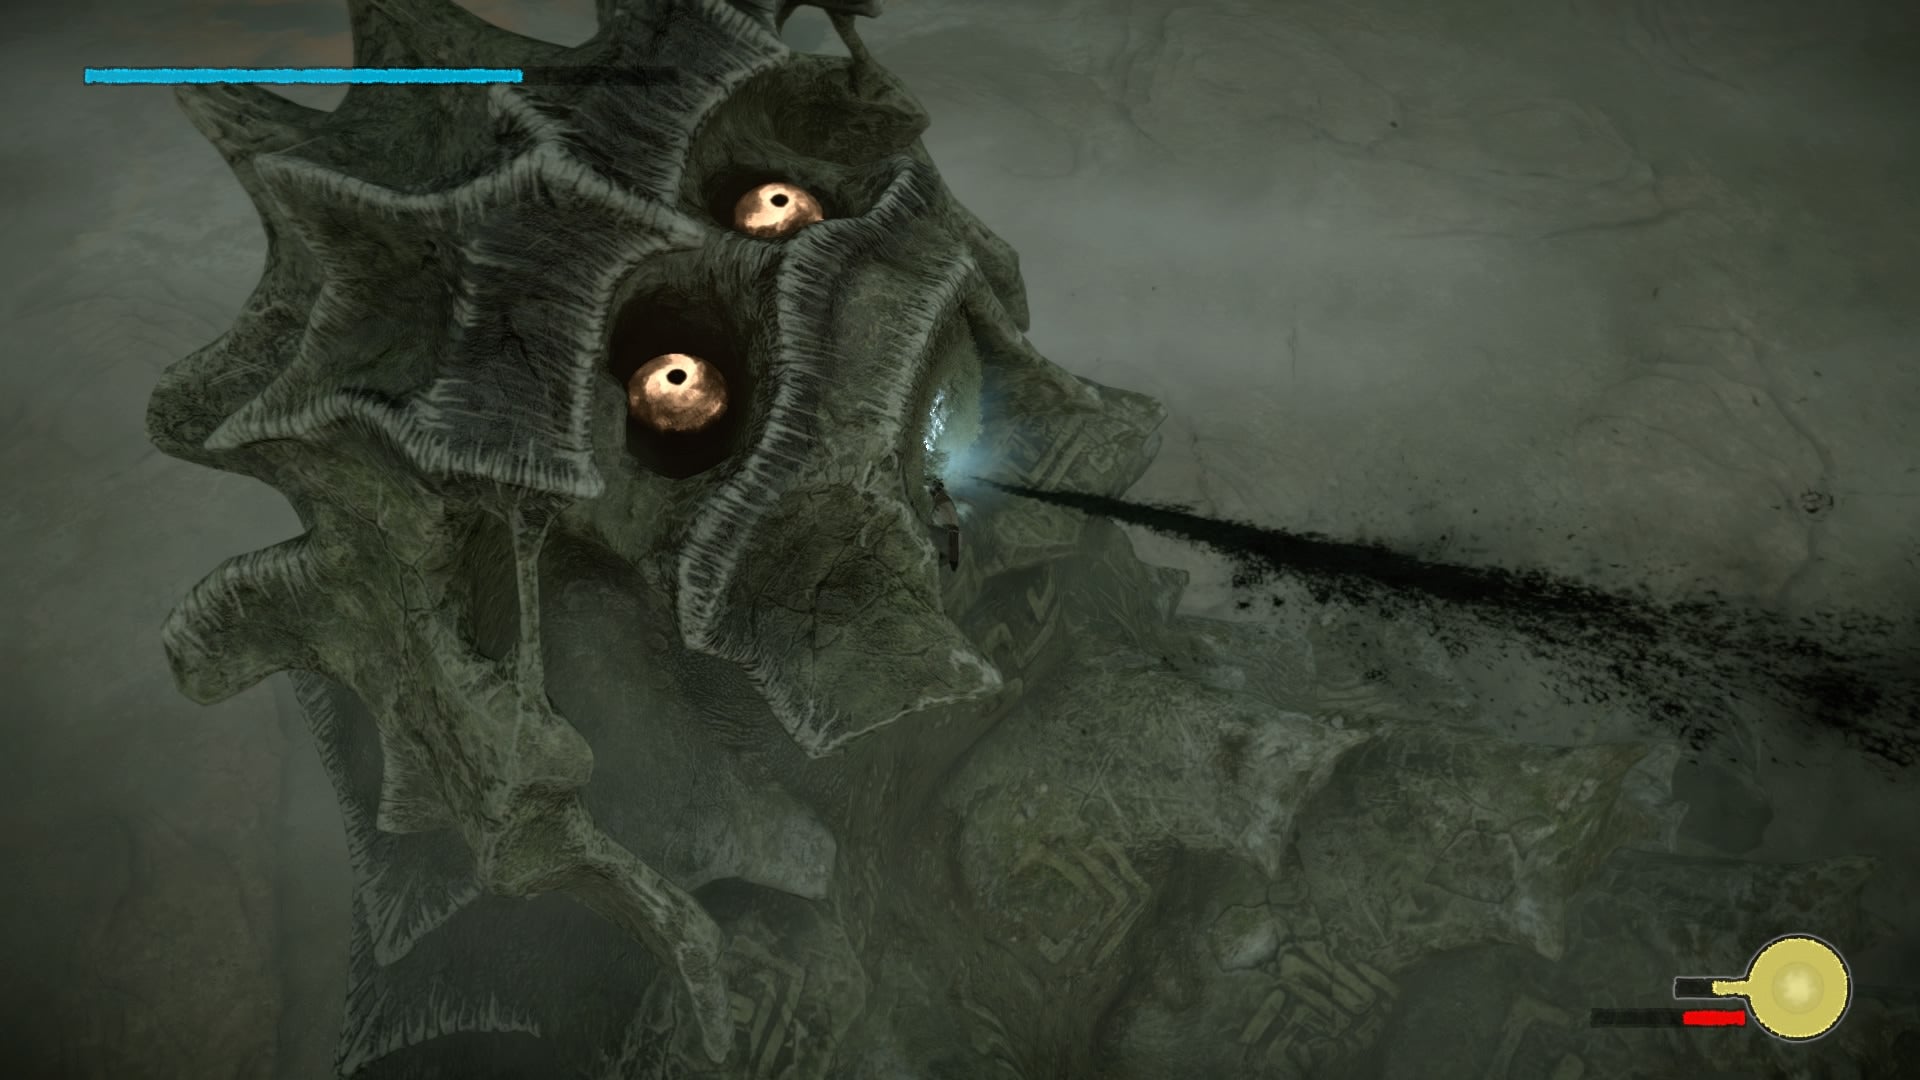 Image for Shadow of the Colossus: how to beat Colossus 9 - Lurker of the Cave